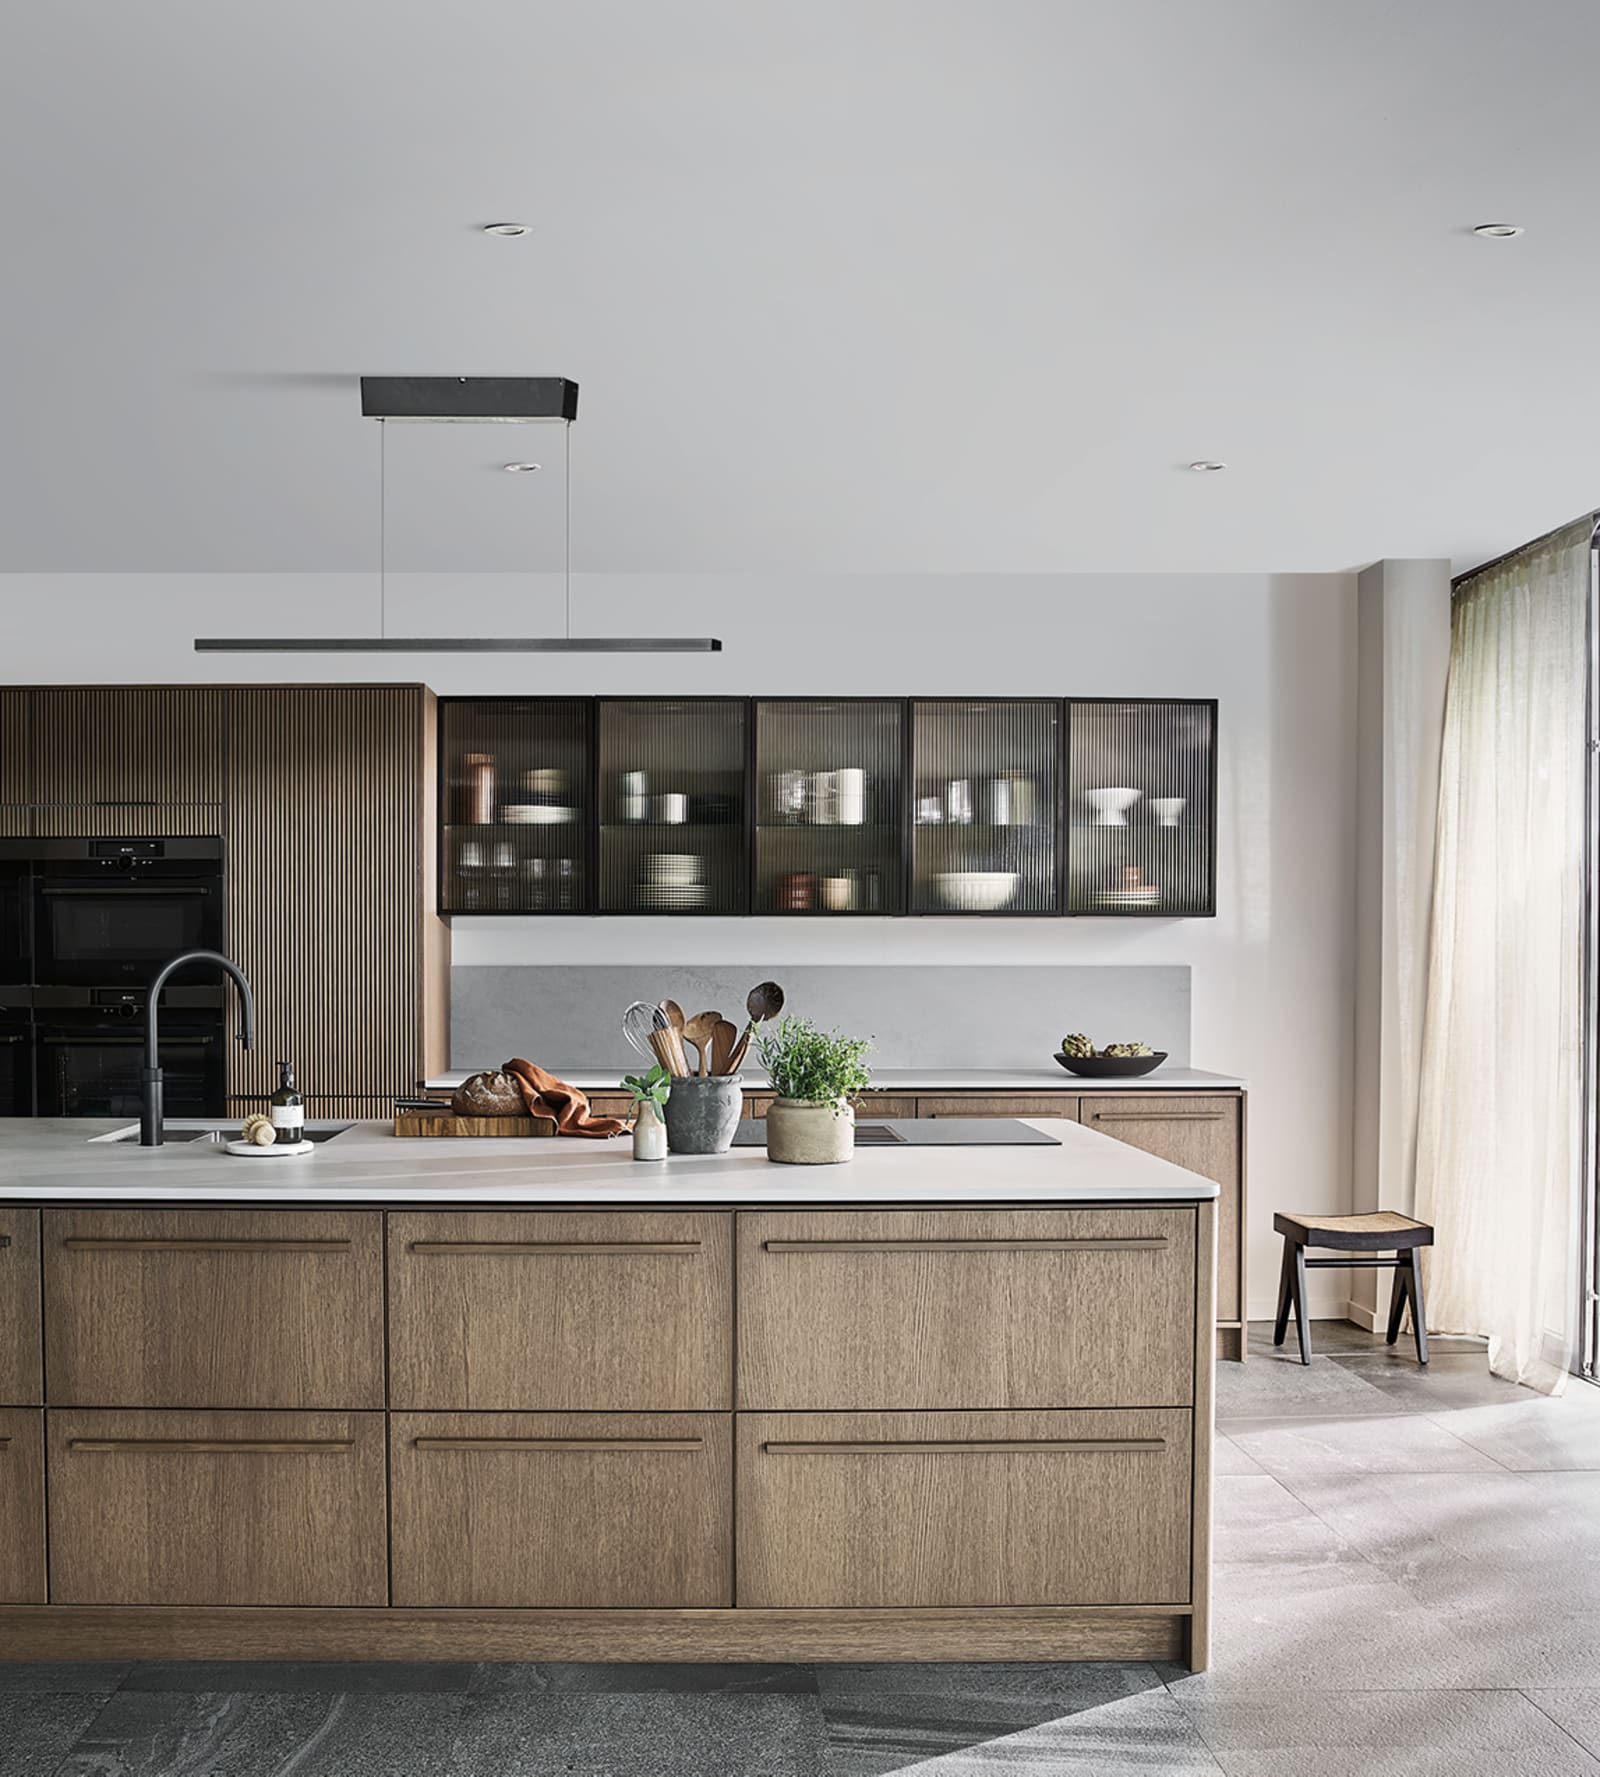 Kitchen Trends for 2022 - The Rangecookers Blog